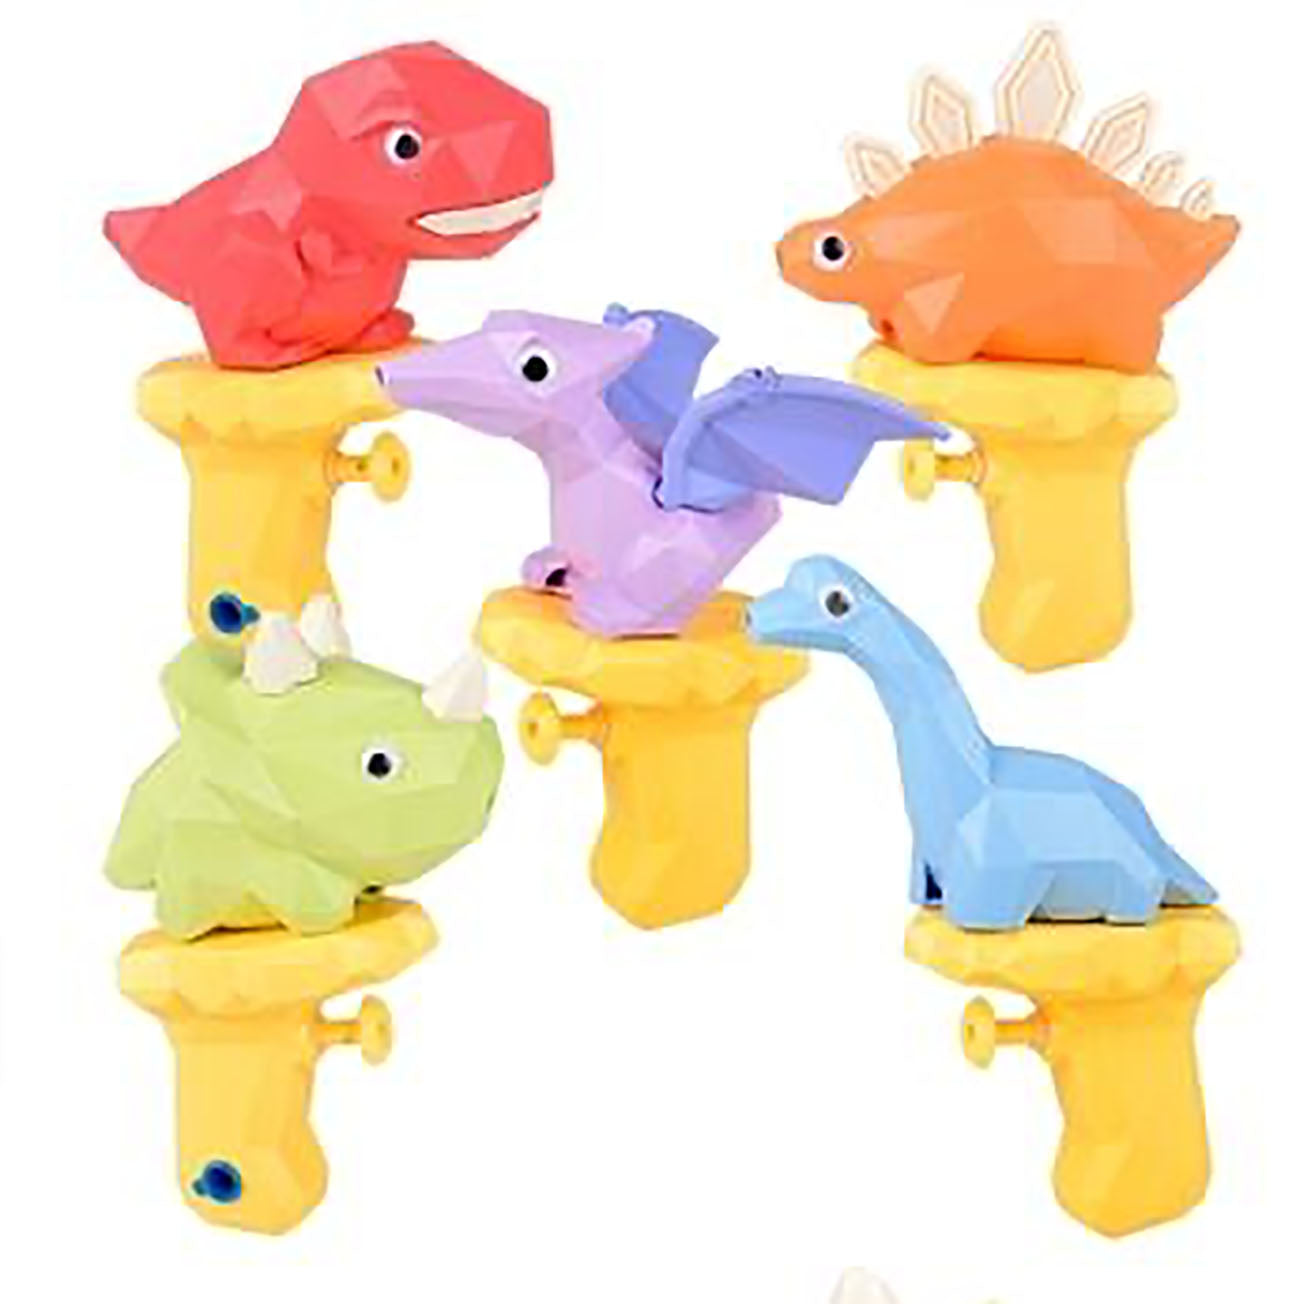 LAST CHANCE - LIMITED STOCK  - Cute Dinosaur Dino Squirt Gun - Water Squirter Toy - Outdoor Pool Toy